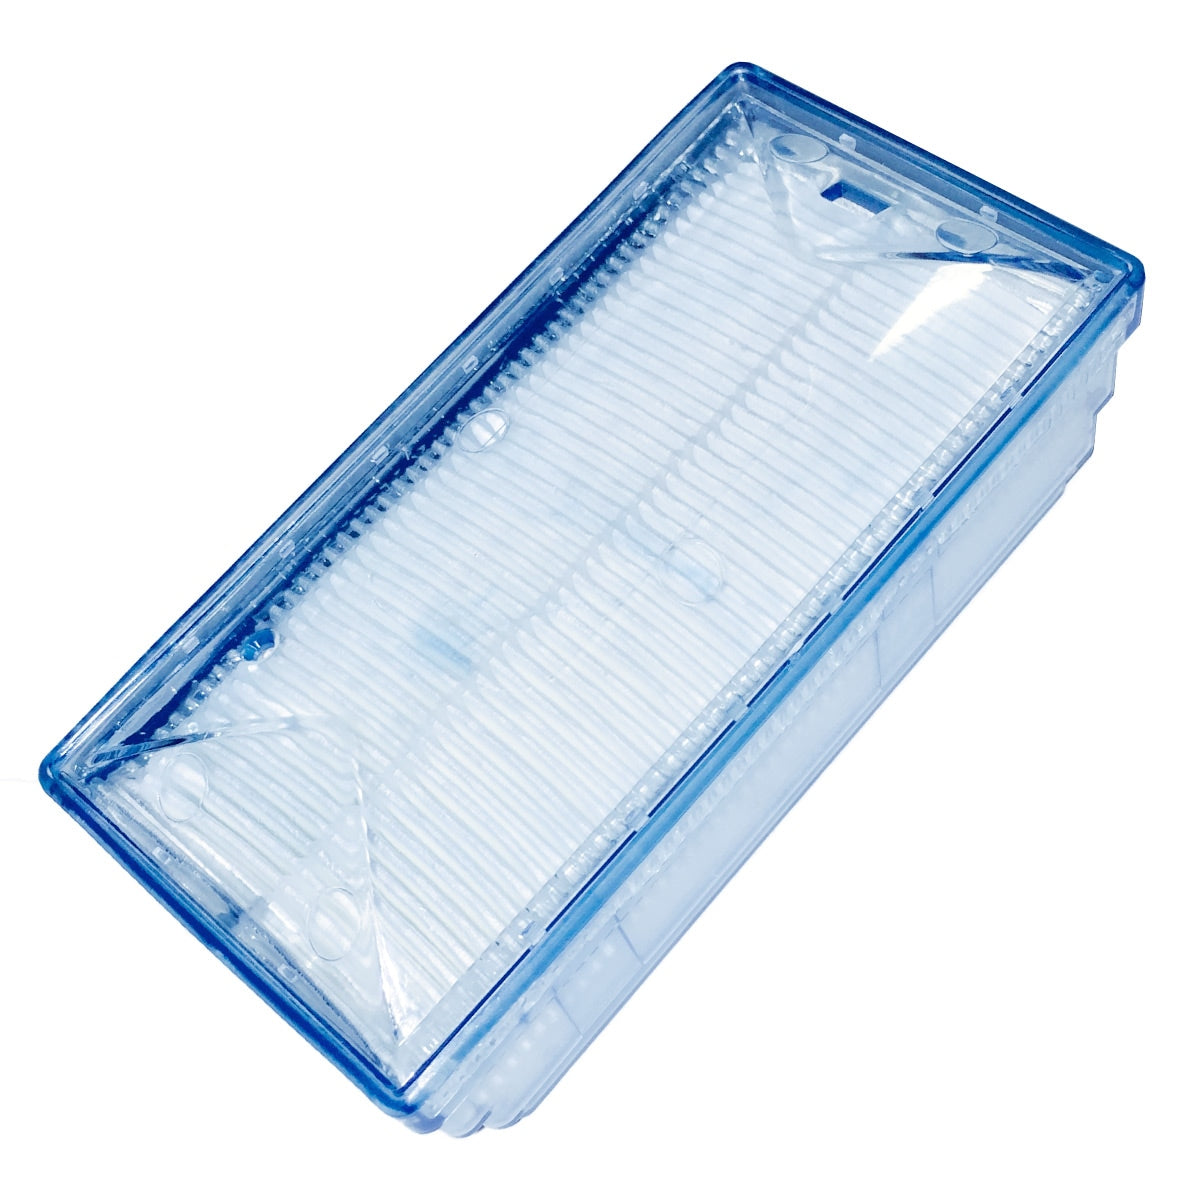 Clear Intake Filter for EverFlo & EverFlo Q Stationary Oxygen Concentrators